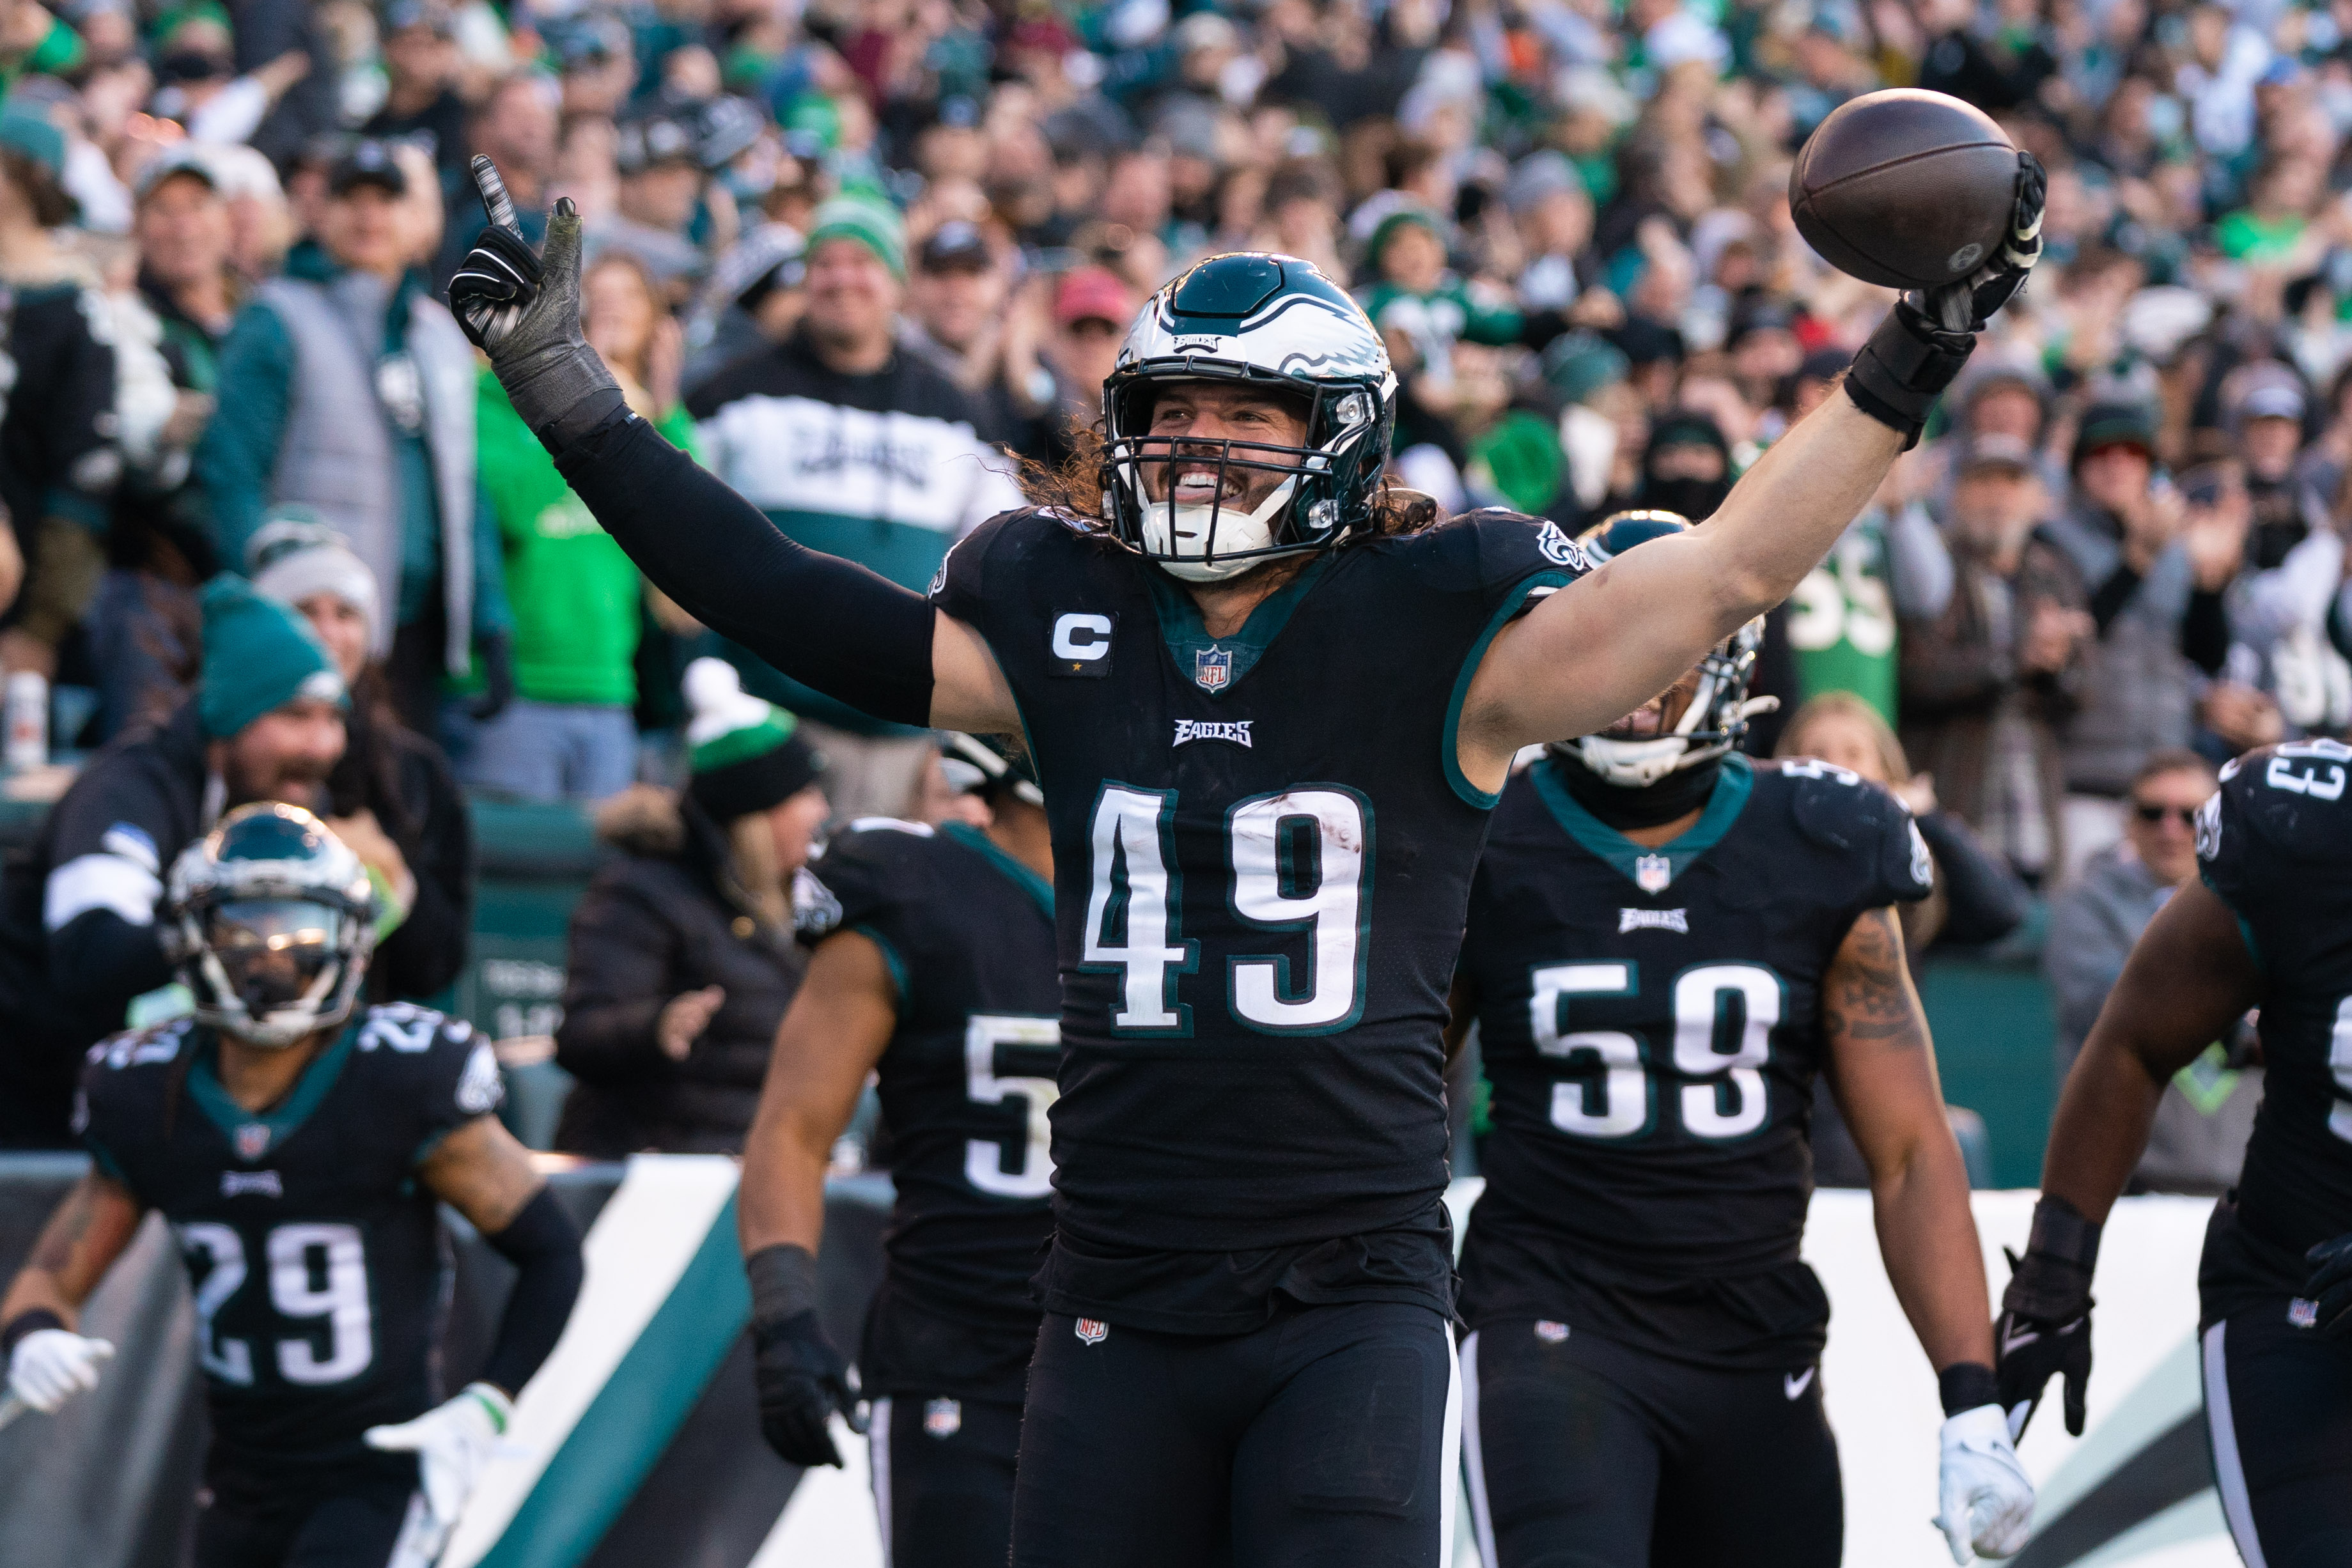 Philadelphia Eagles outside linebacker Alex Singleton (49) celebrates after his interception for a touchdown against the New York Giants during the fourth quarter at Lincoln Financial Field.